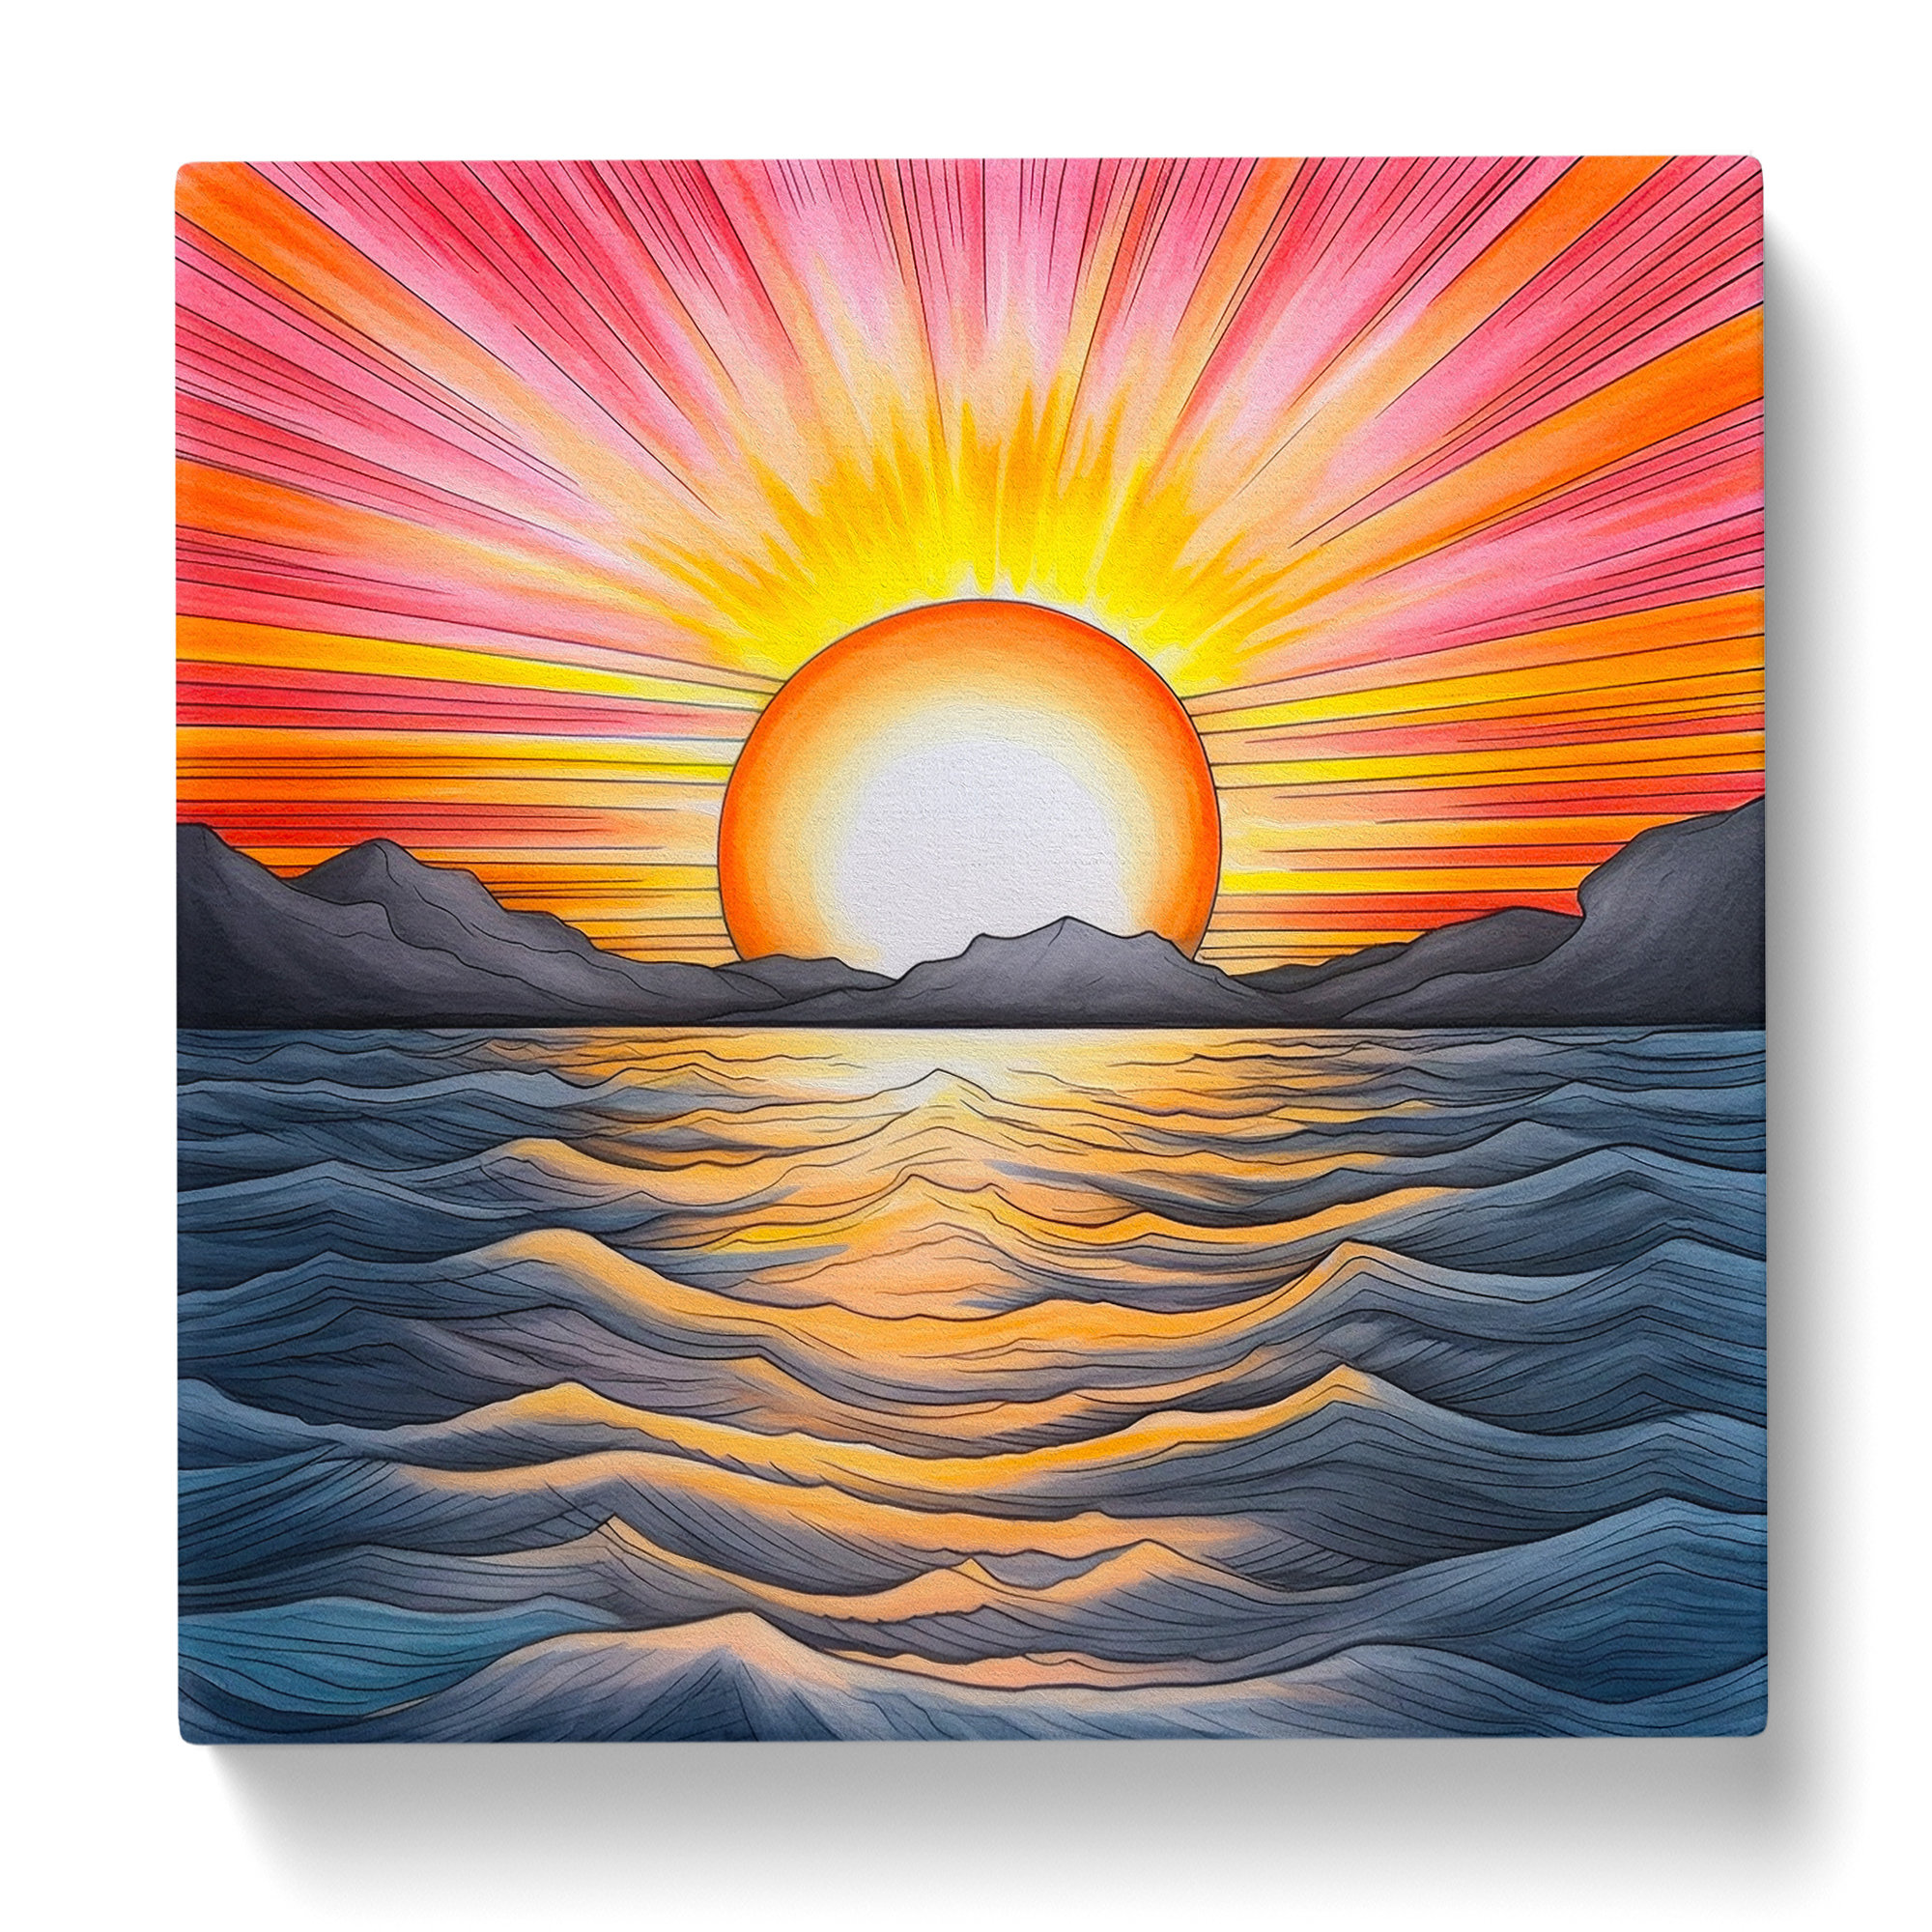 50 Beautiful Sunrise Sunset and Moon Paintings for your inspiration